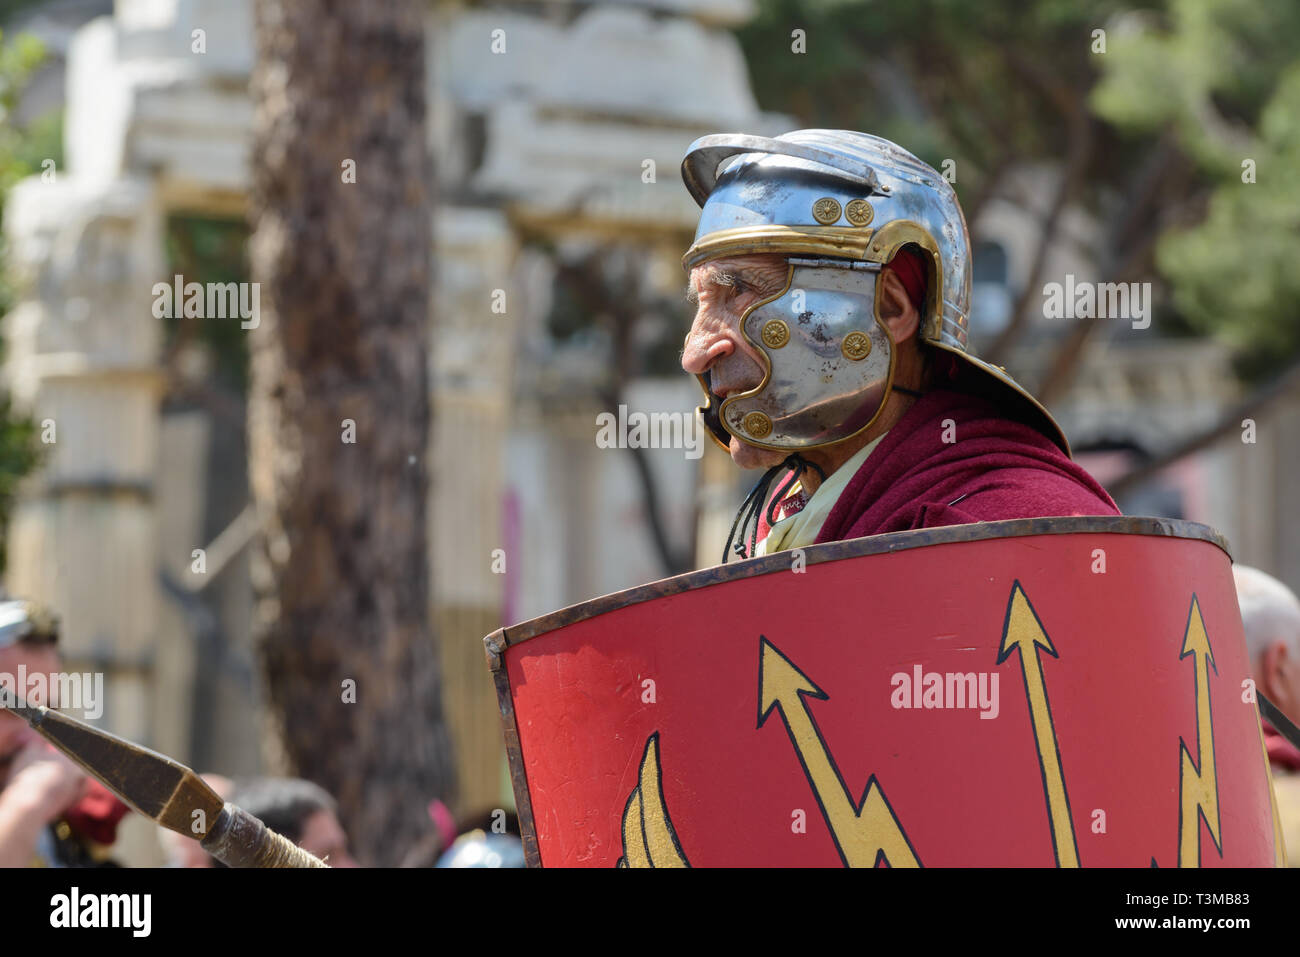 Rome, Italy - April 23, 2017:  the representation of the ancient romans in the Birthday of Rome, with centurions, soldiers, legions, senators, handmai Stock Photo